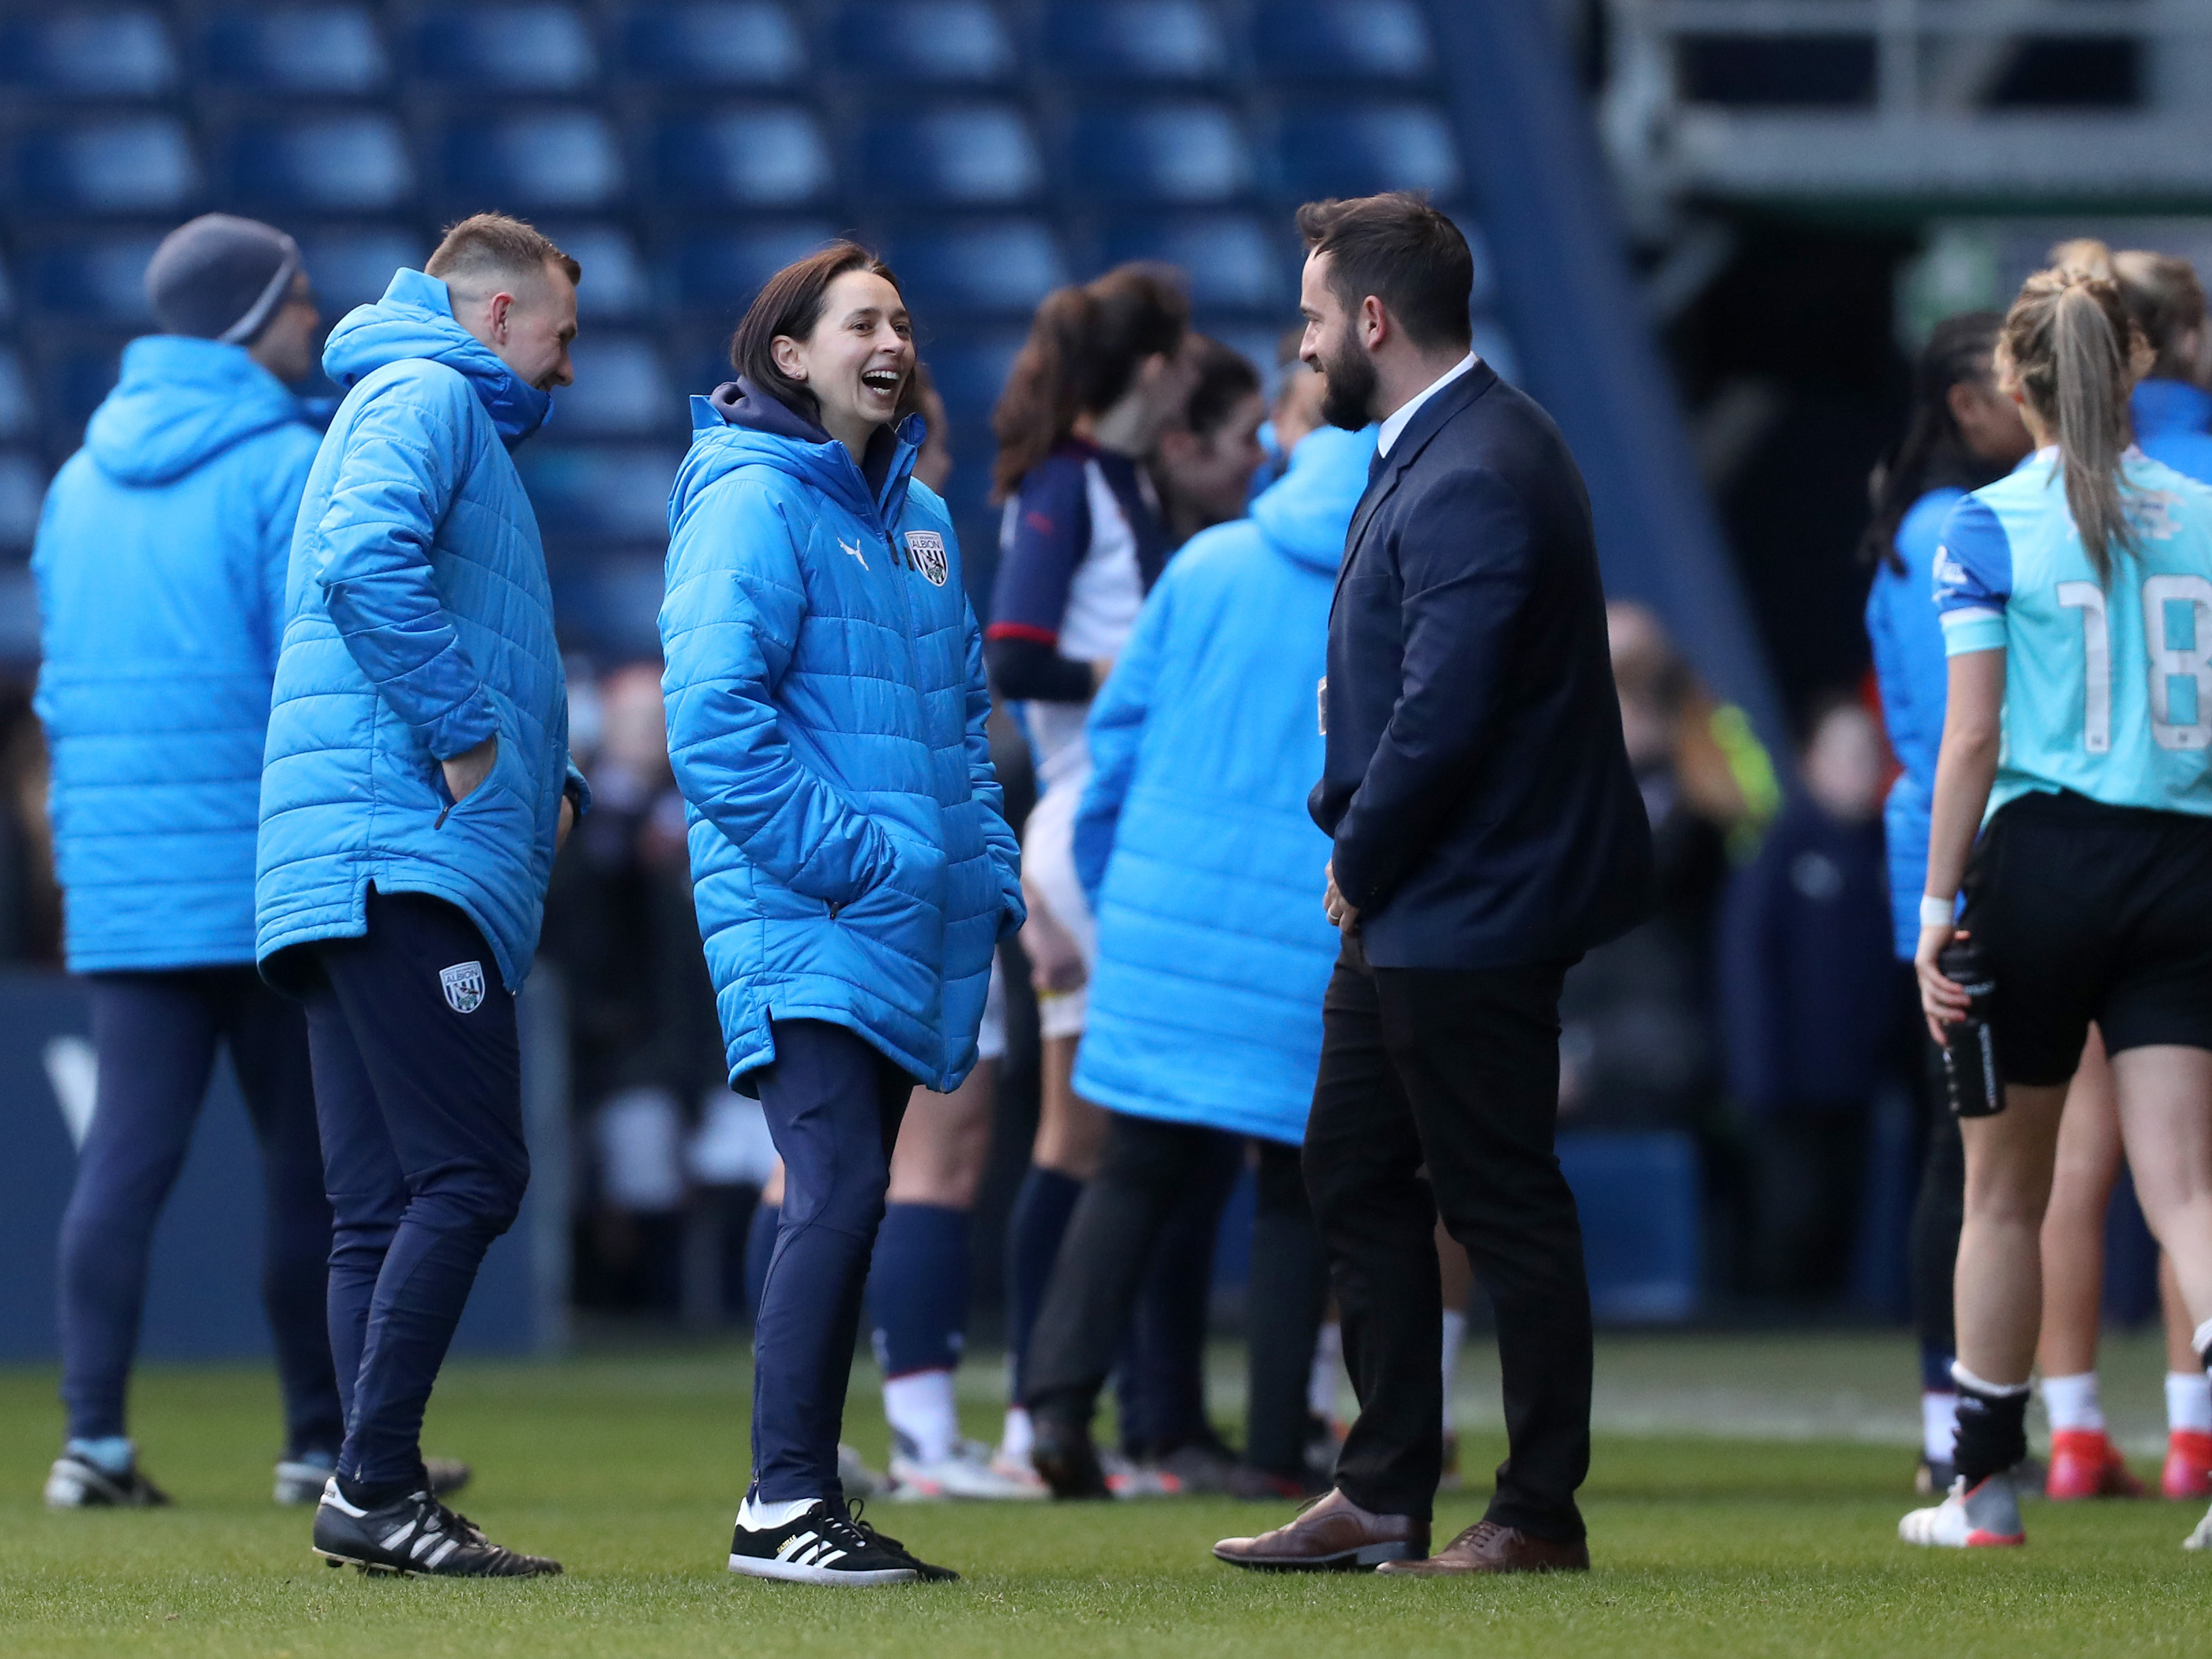 Jenny Sugarman was delighted with her team's display at The Hawthorns